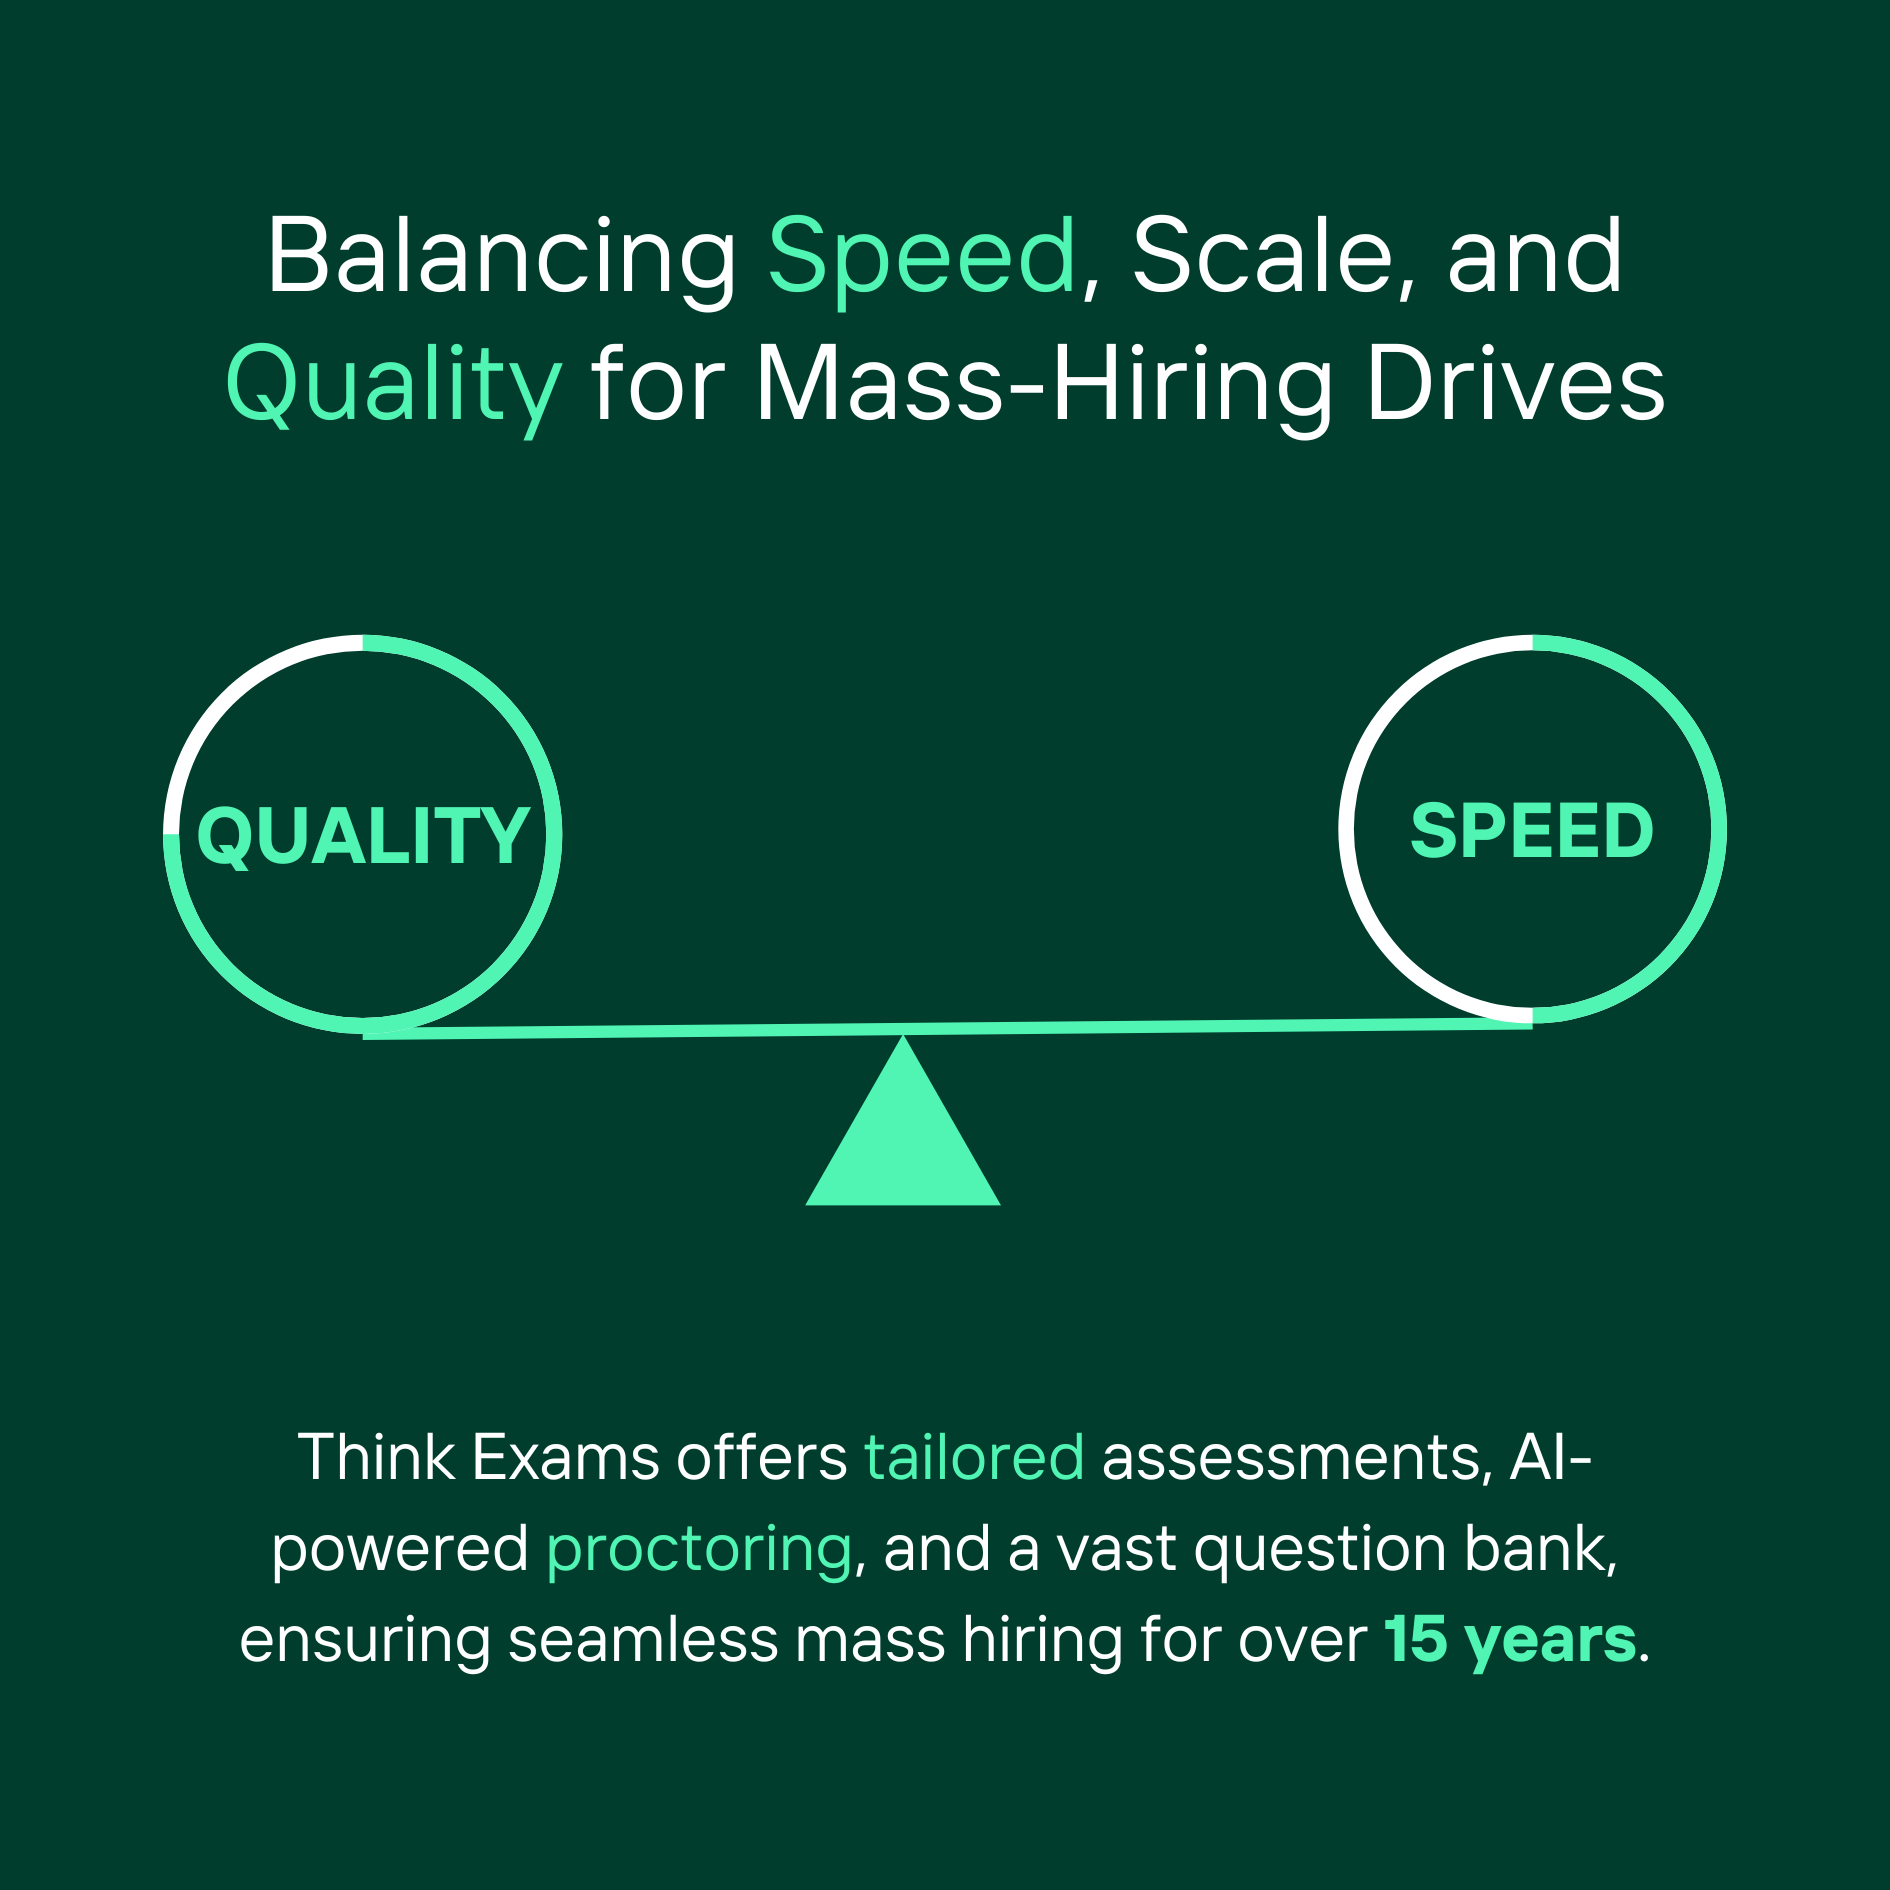 Balancing Speed, Scale, and Quality for Mass-Hiring Drives